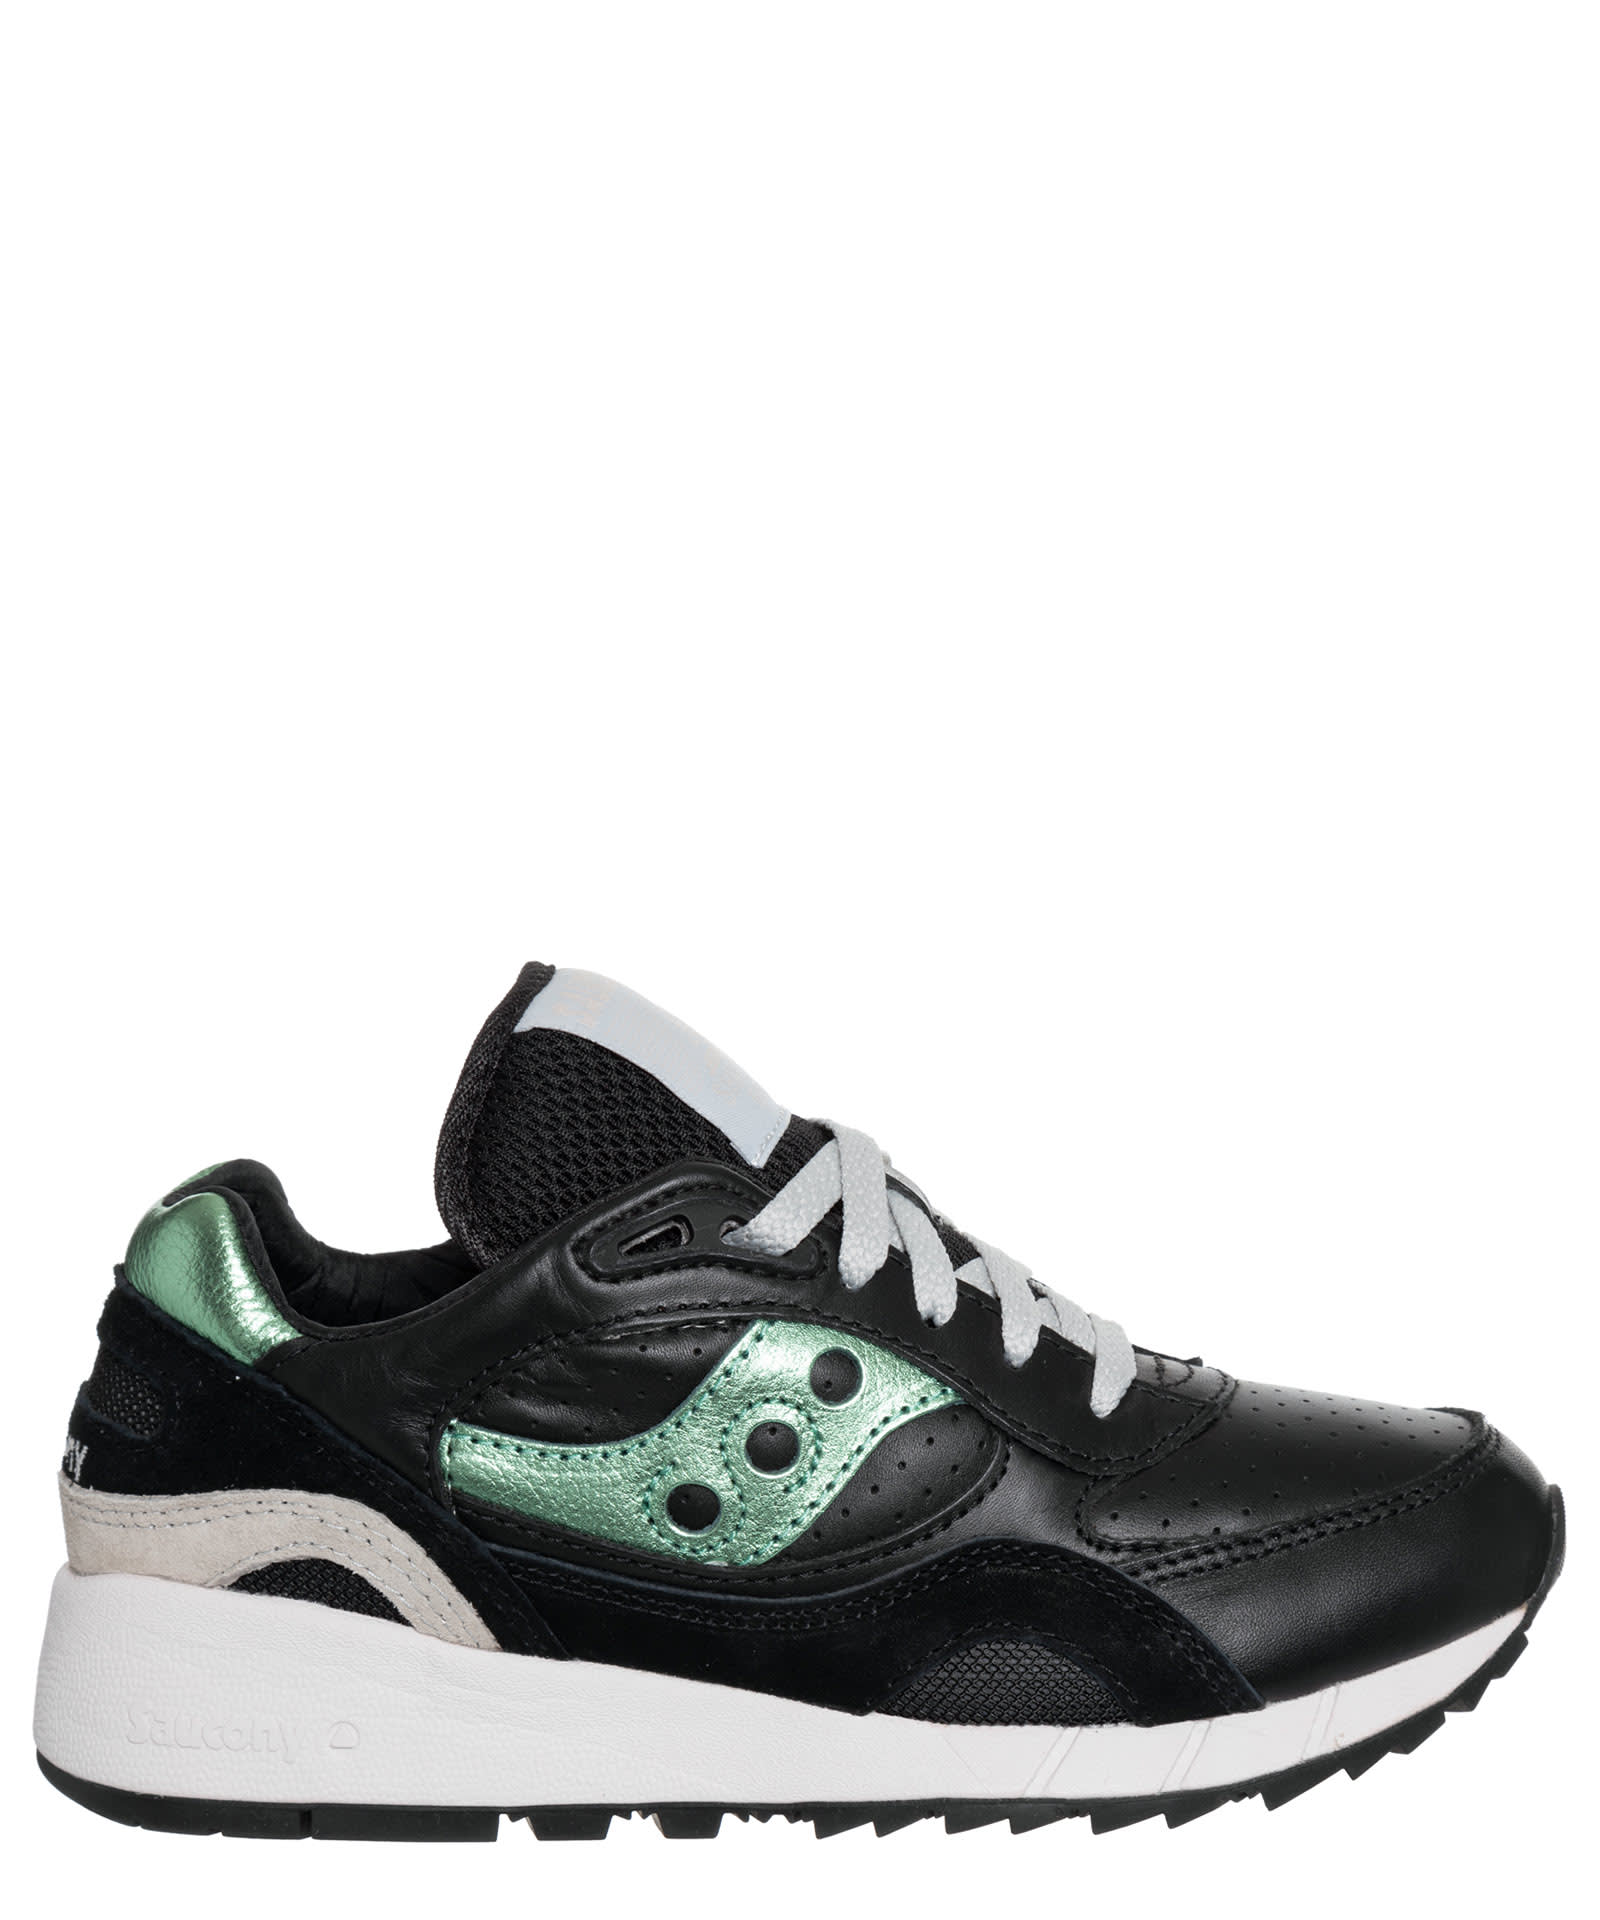 SAUCONY SHADOW 6000 LEATHER SNEAKERS